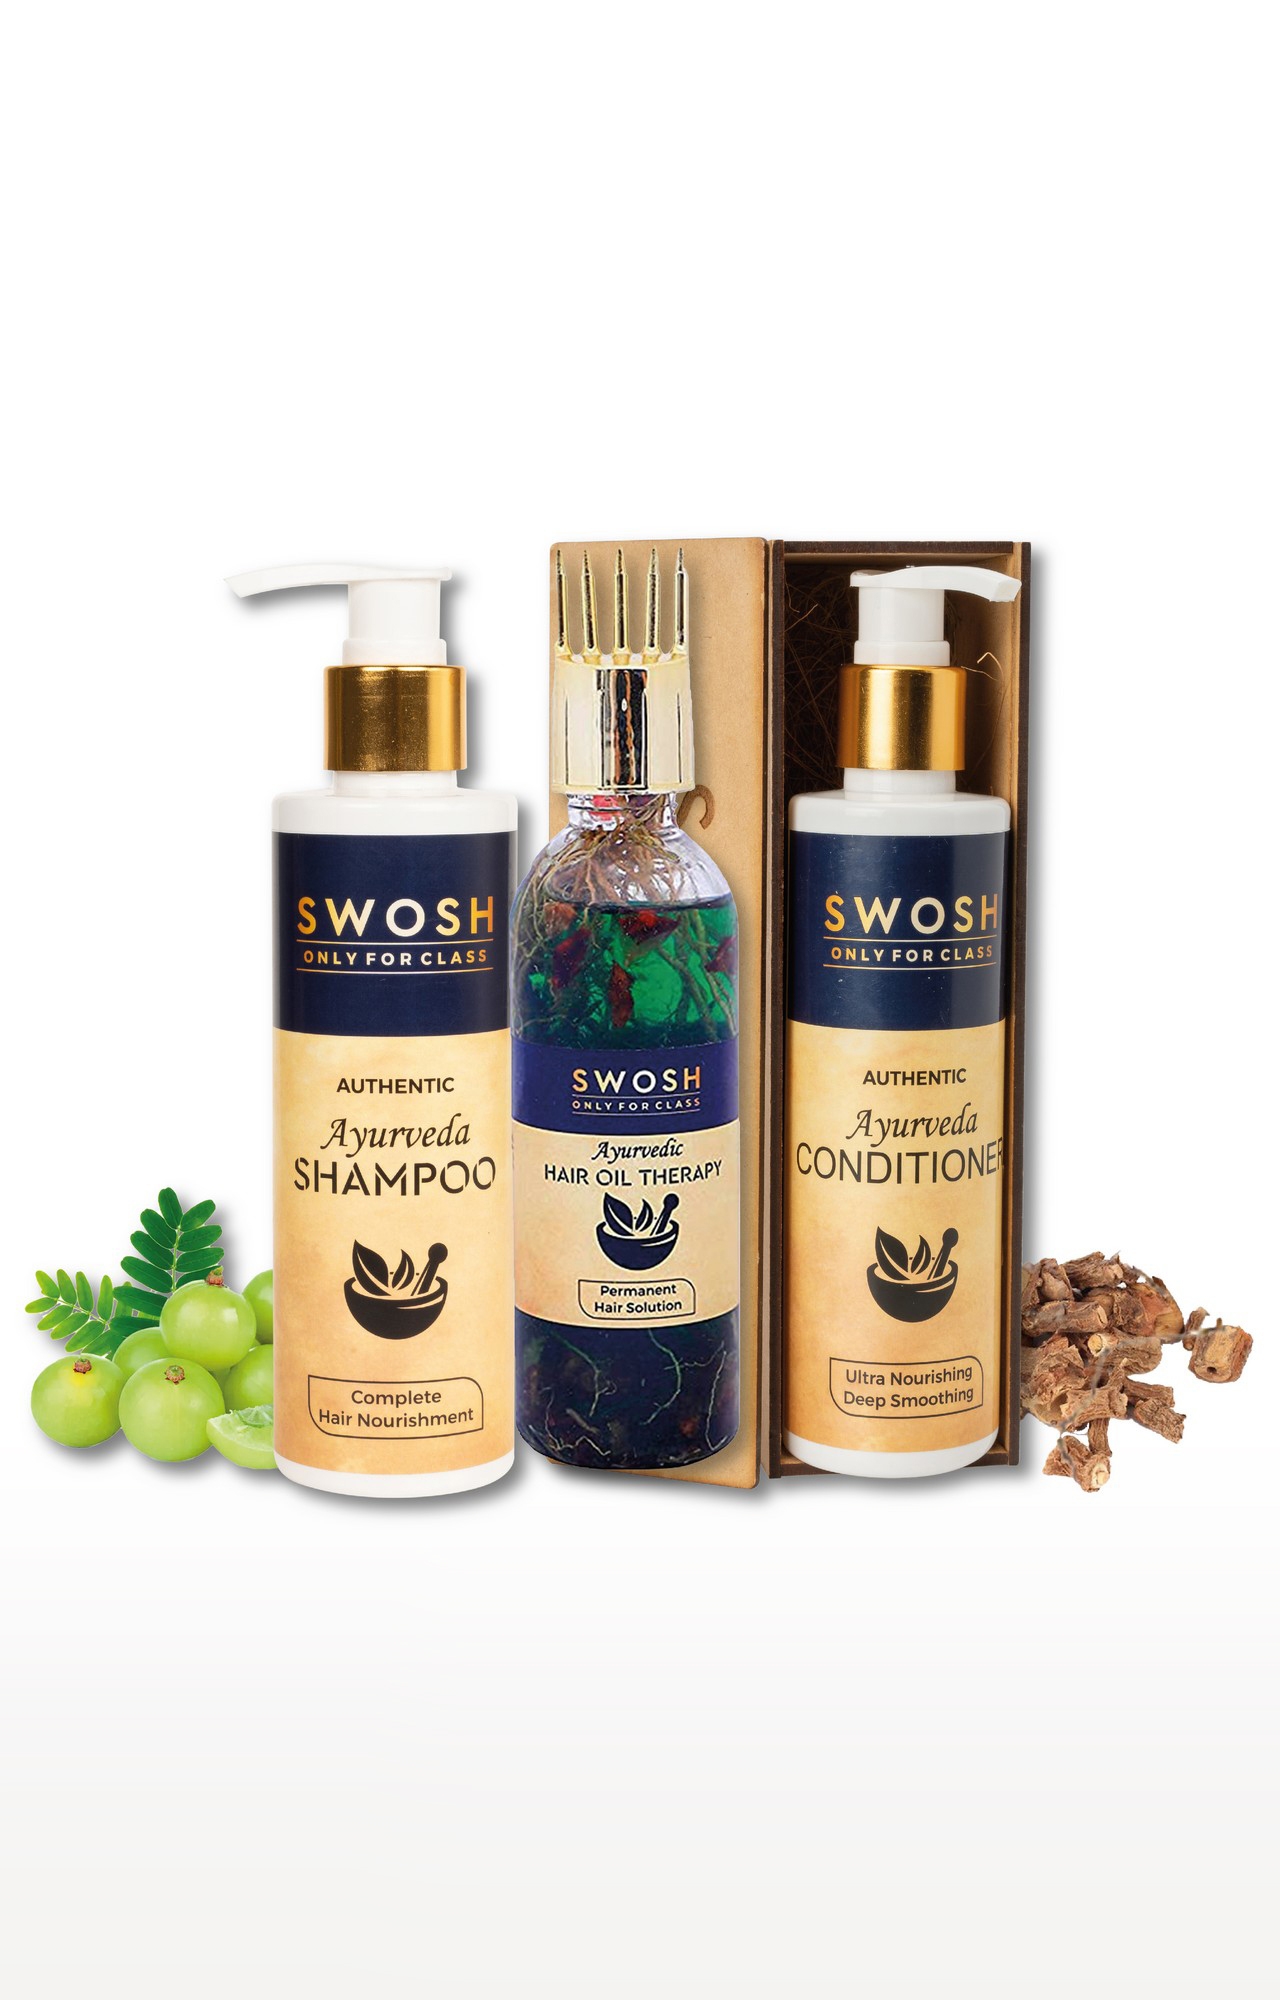 Swosh Ayurvedic Hair Care Combo Pack Of 3 Hair Oil 100 Ml, Shampoo 200 Ml, Conditioner 200 Ml Combo Kit Provide Long, Smooth And Healthy Hair And Nourish The Roots